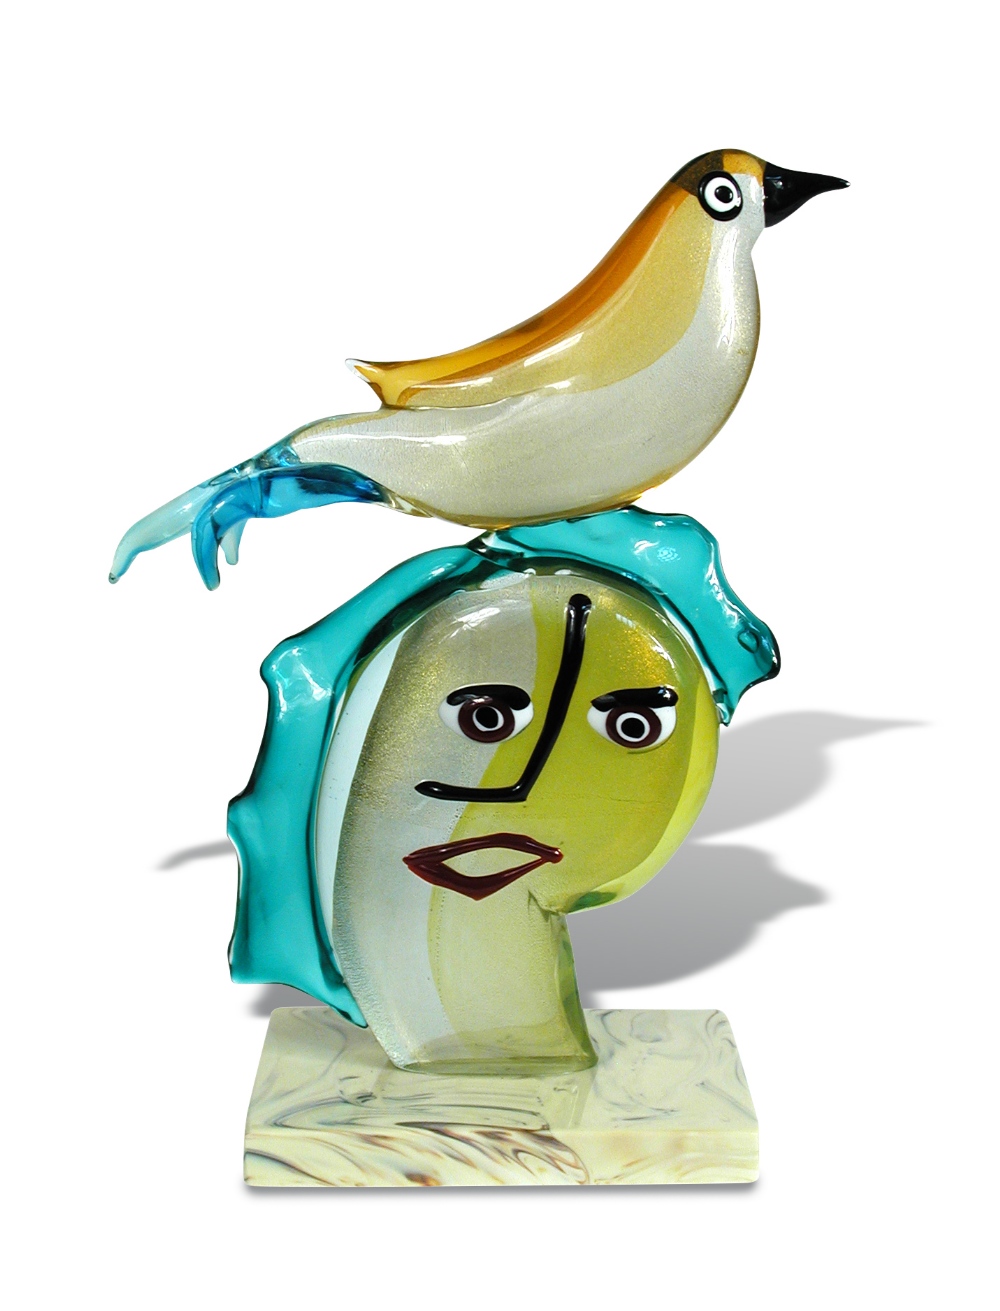 § Alessandro Barbaro for Murano, a Picasso style glass head, surmounted with a bird, mounted to a